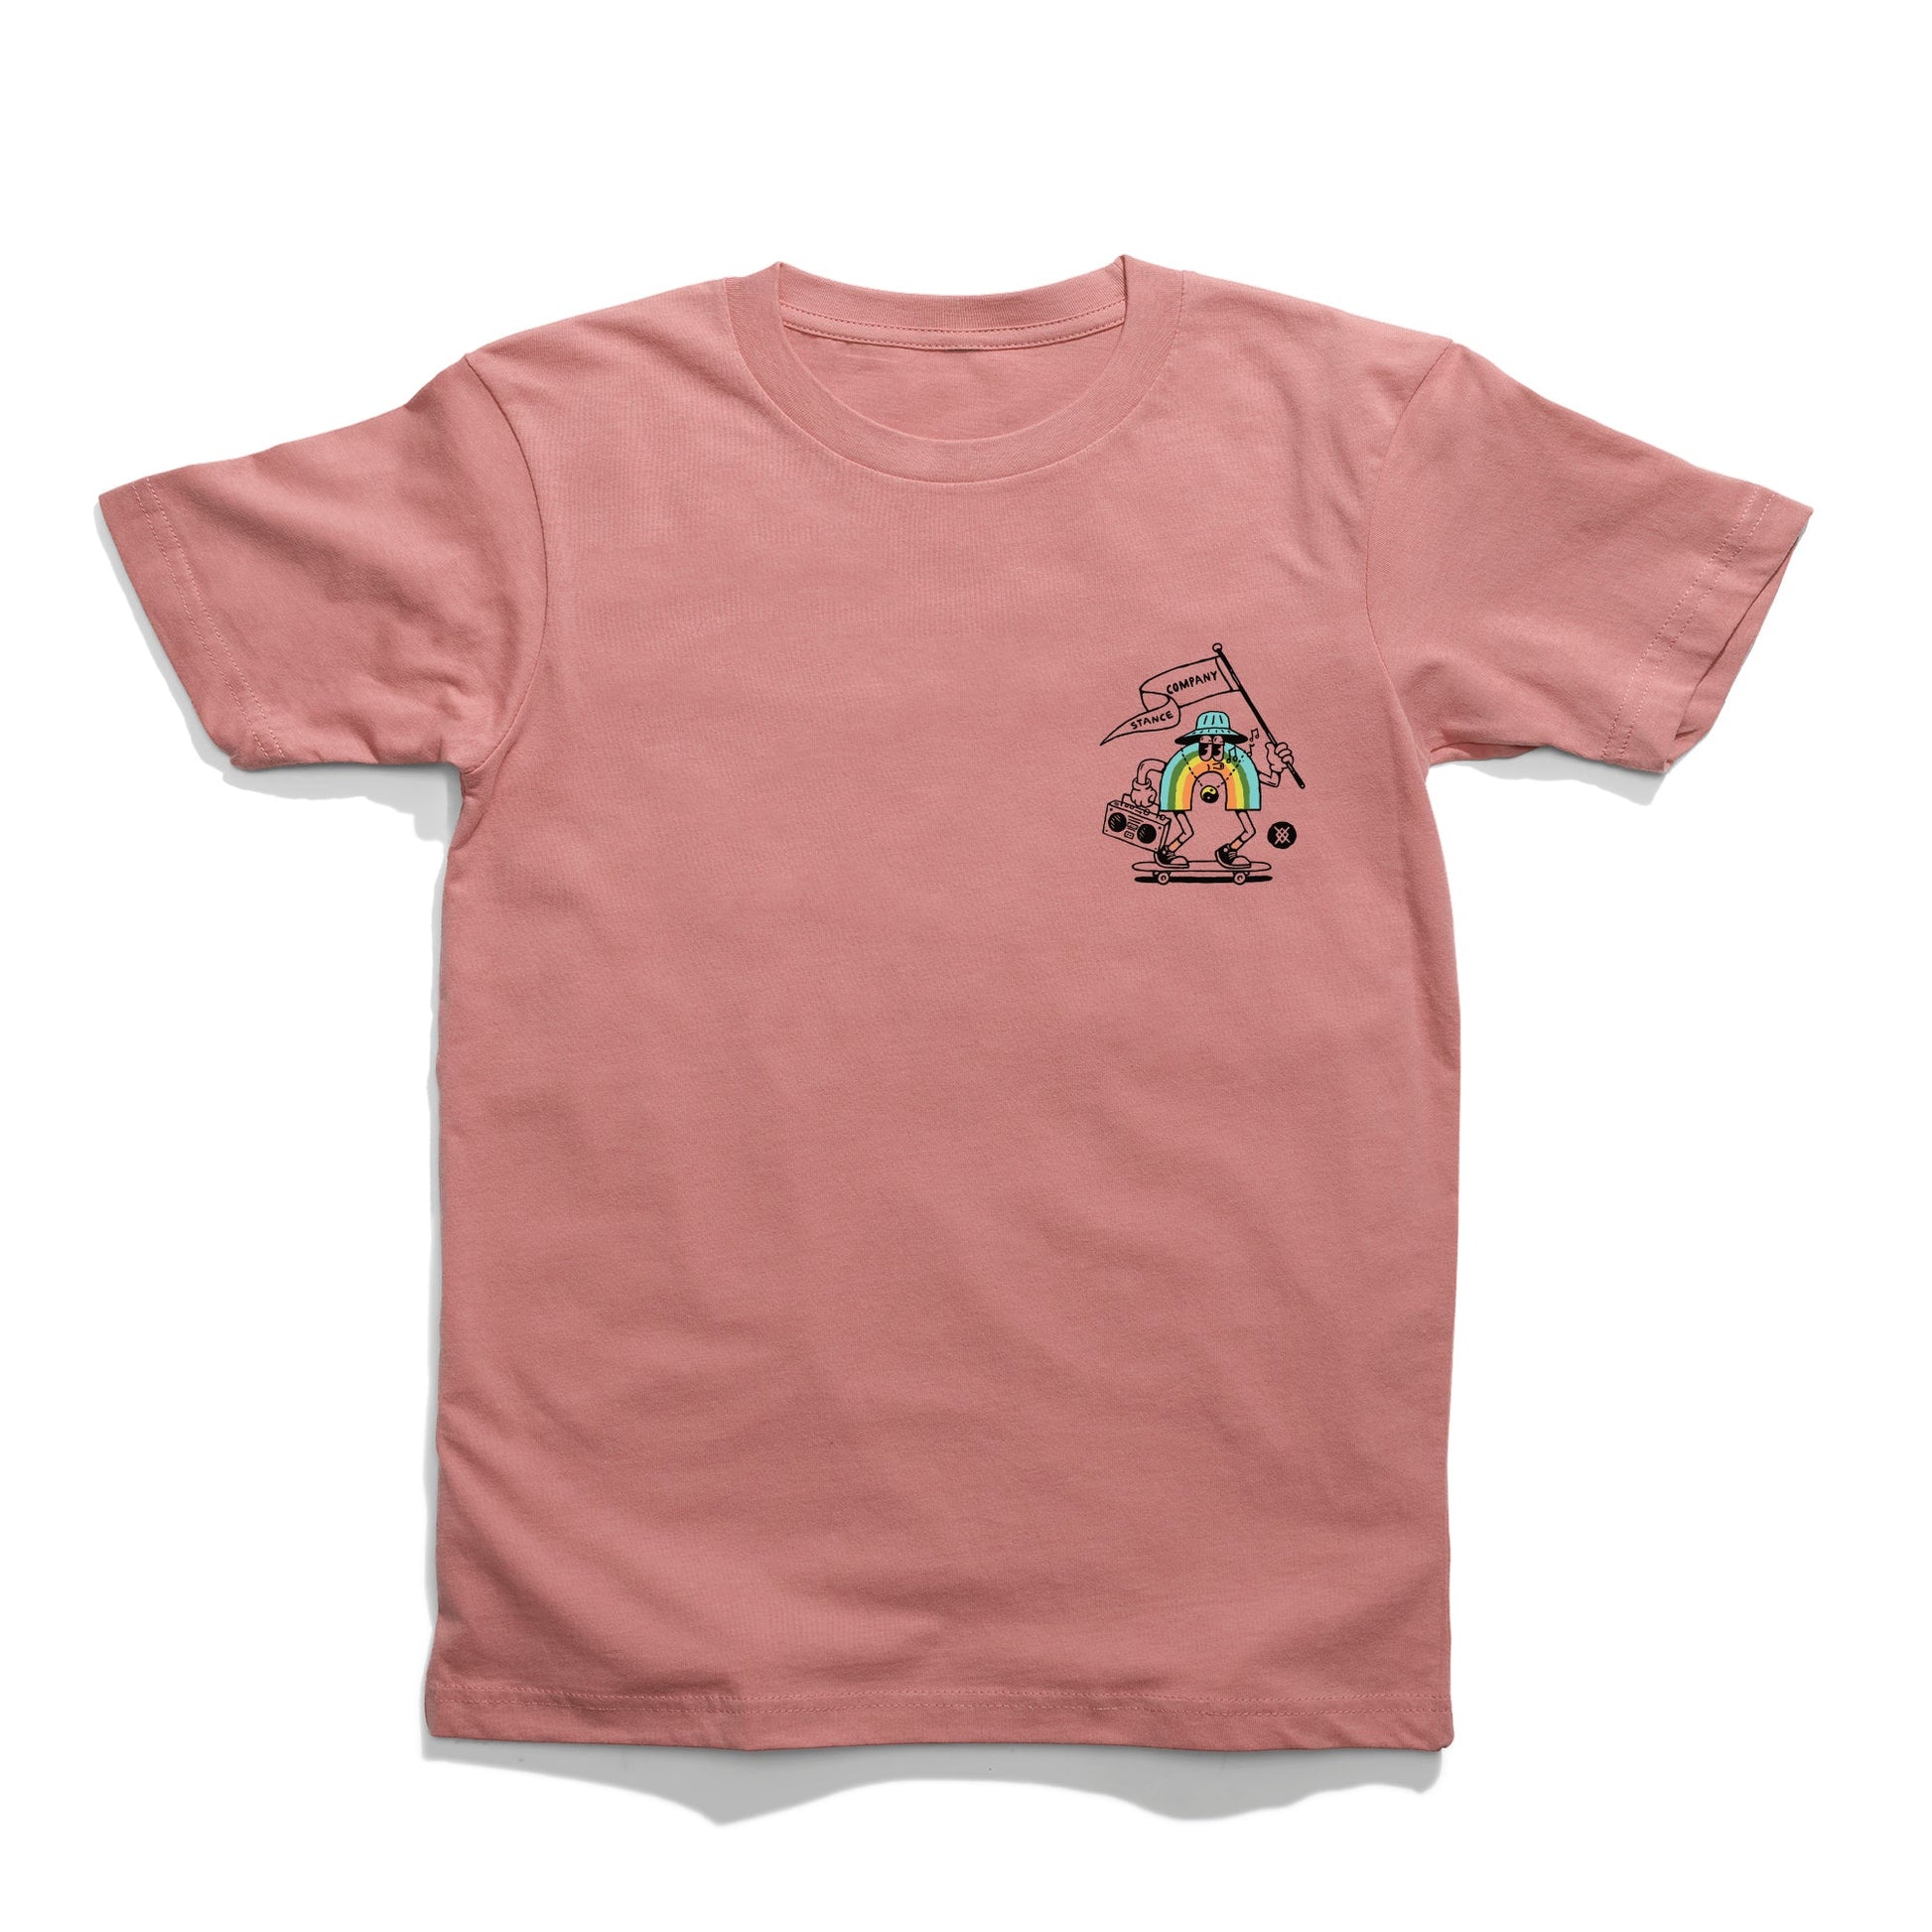 Stance Colours T-Shirt Dusty Rose